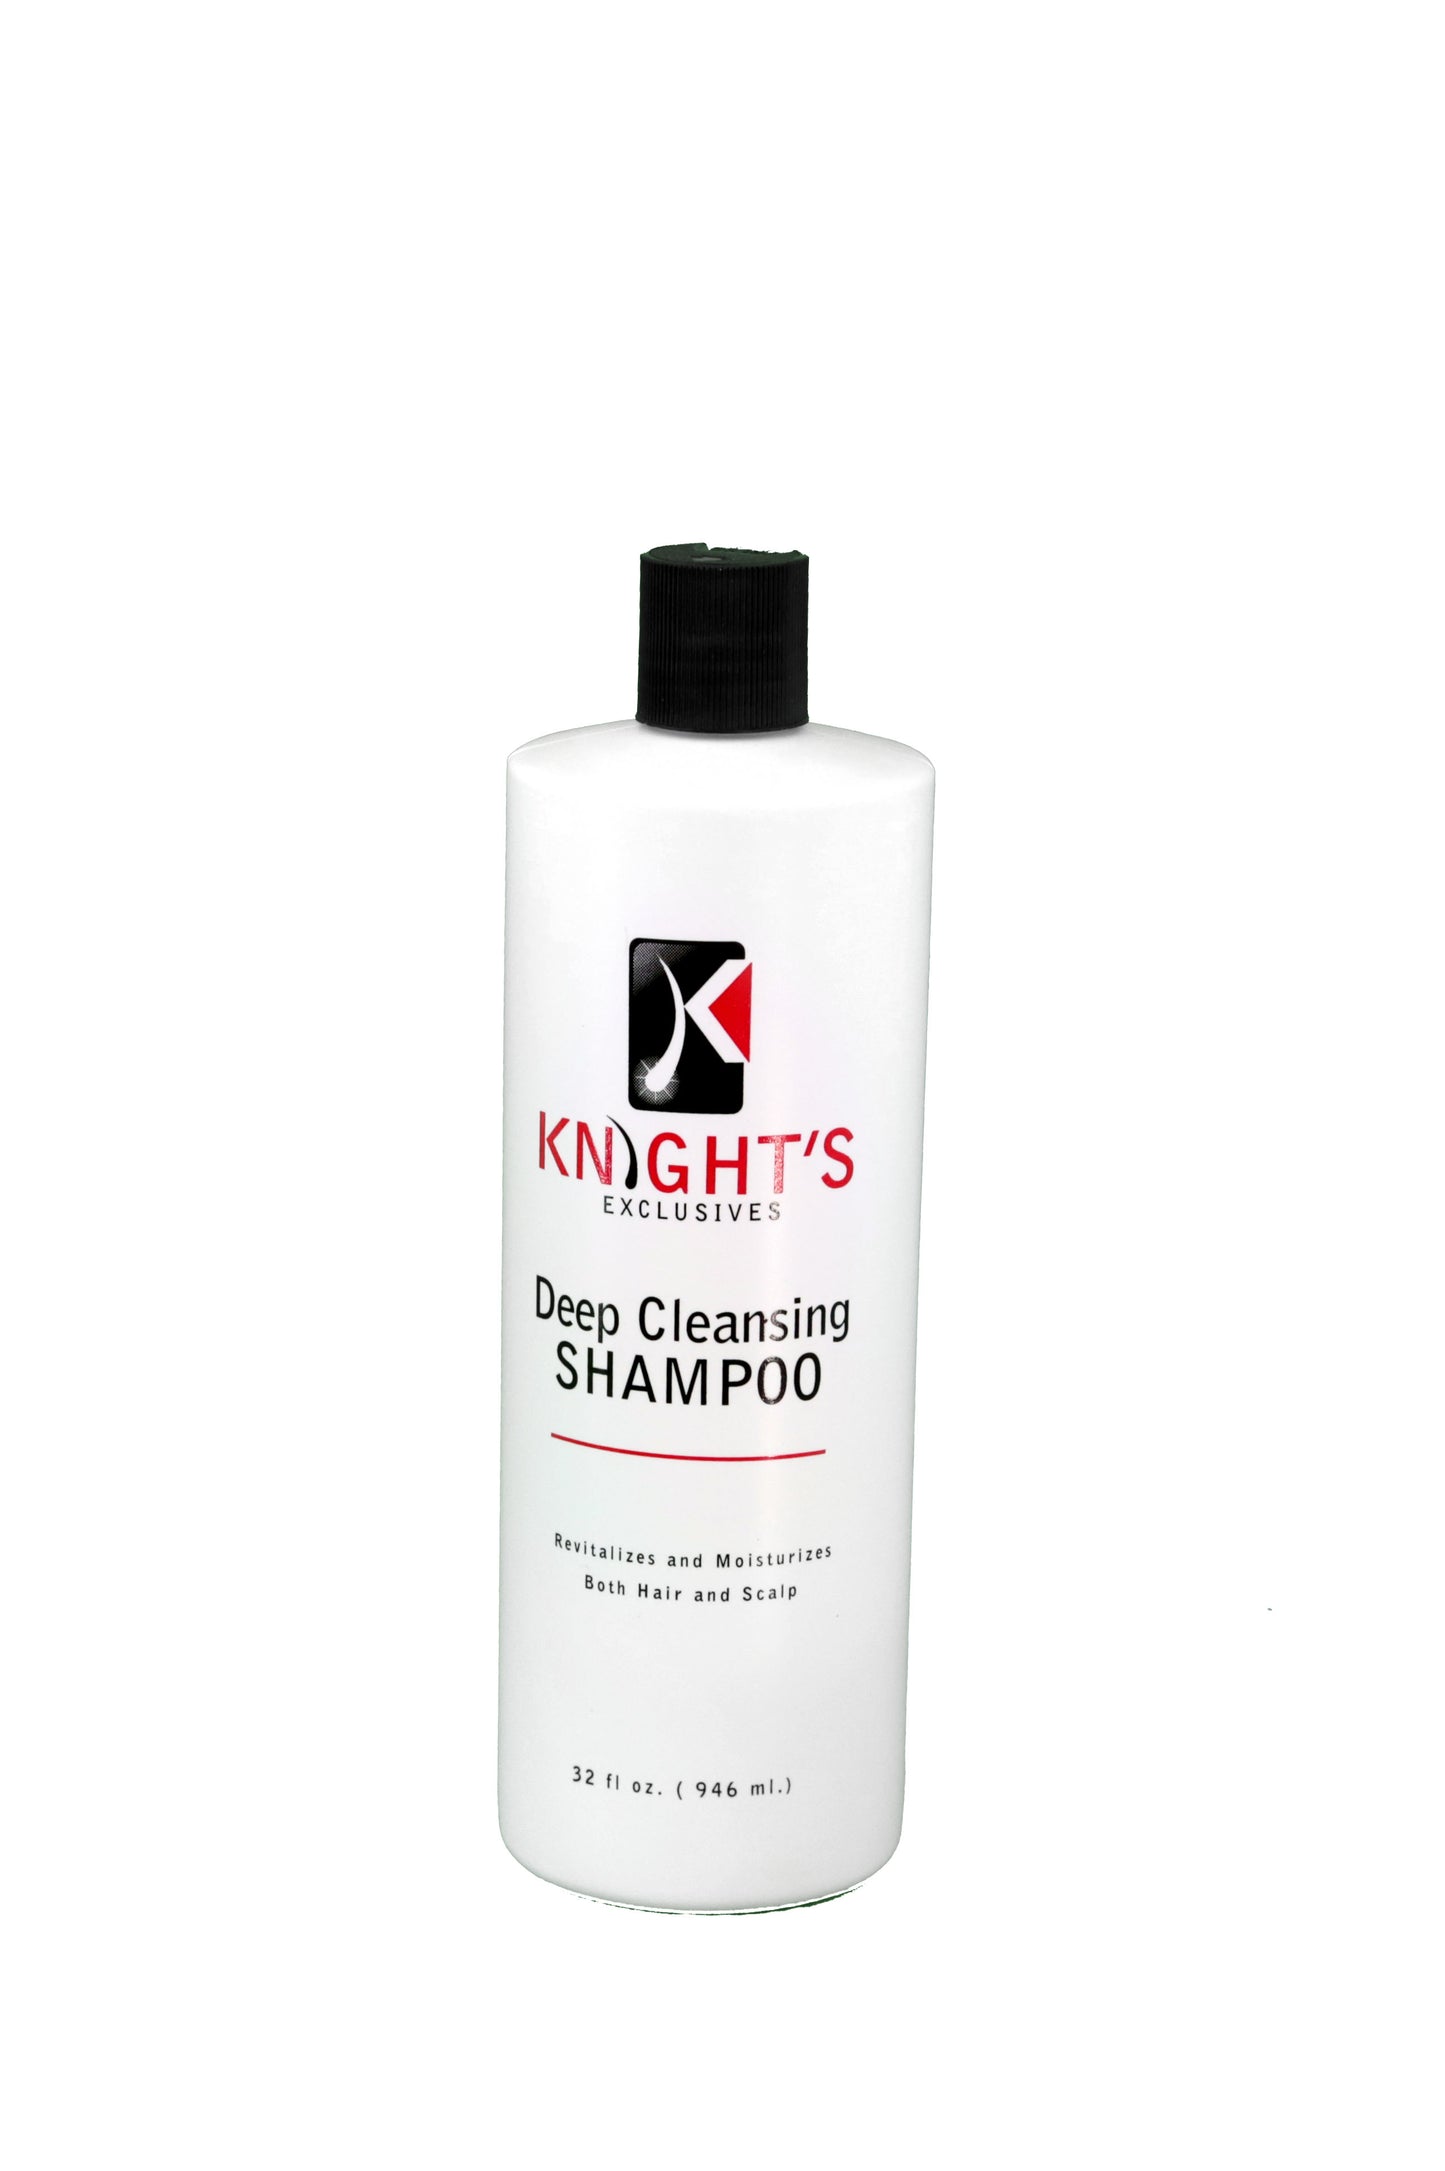 Knights Exclusives Deep Cleansing Shampoo